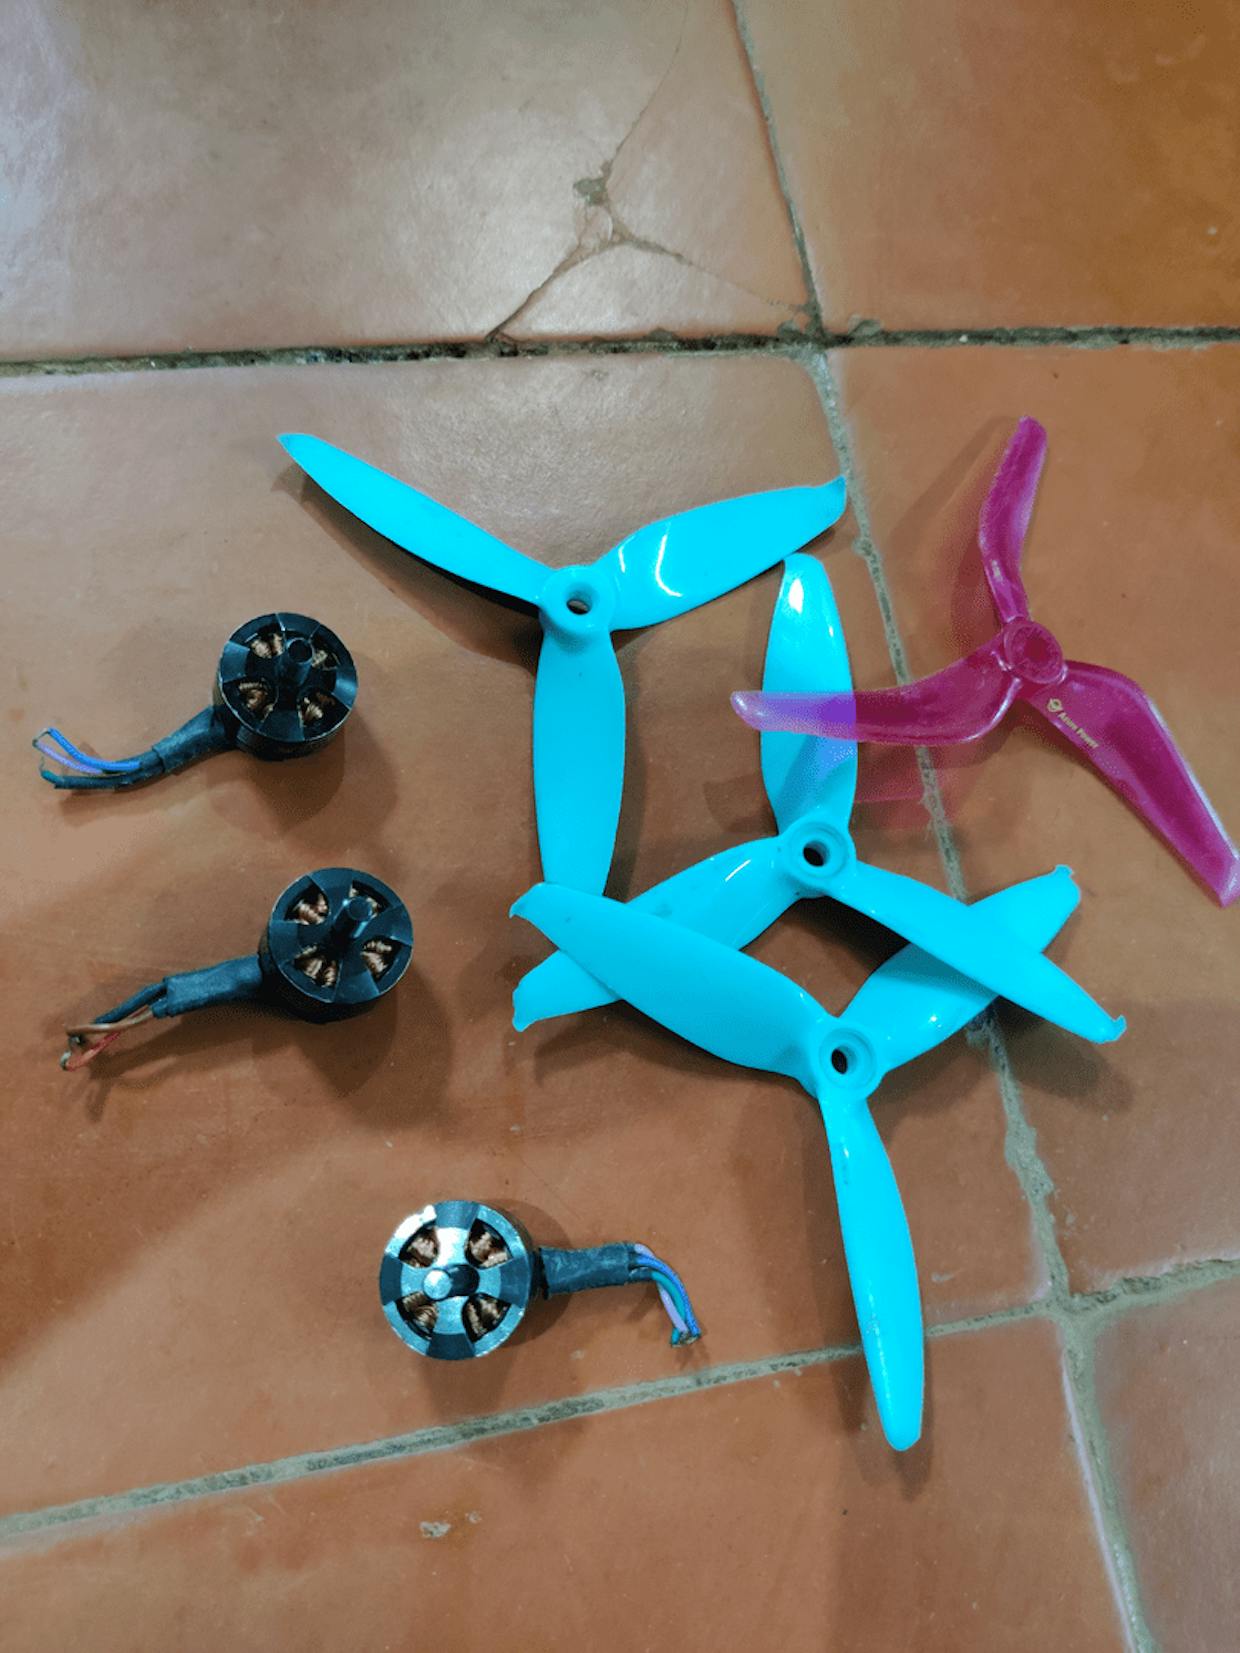 Four Propellers and three BLDC motors - enough to make a tri-copter using the Seriously Dodo flight controller